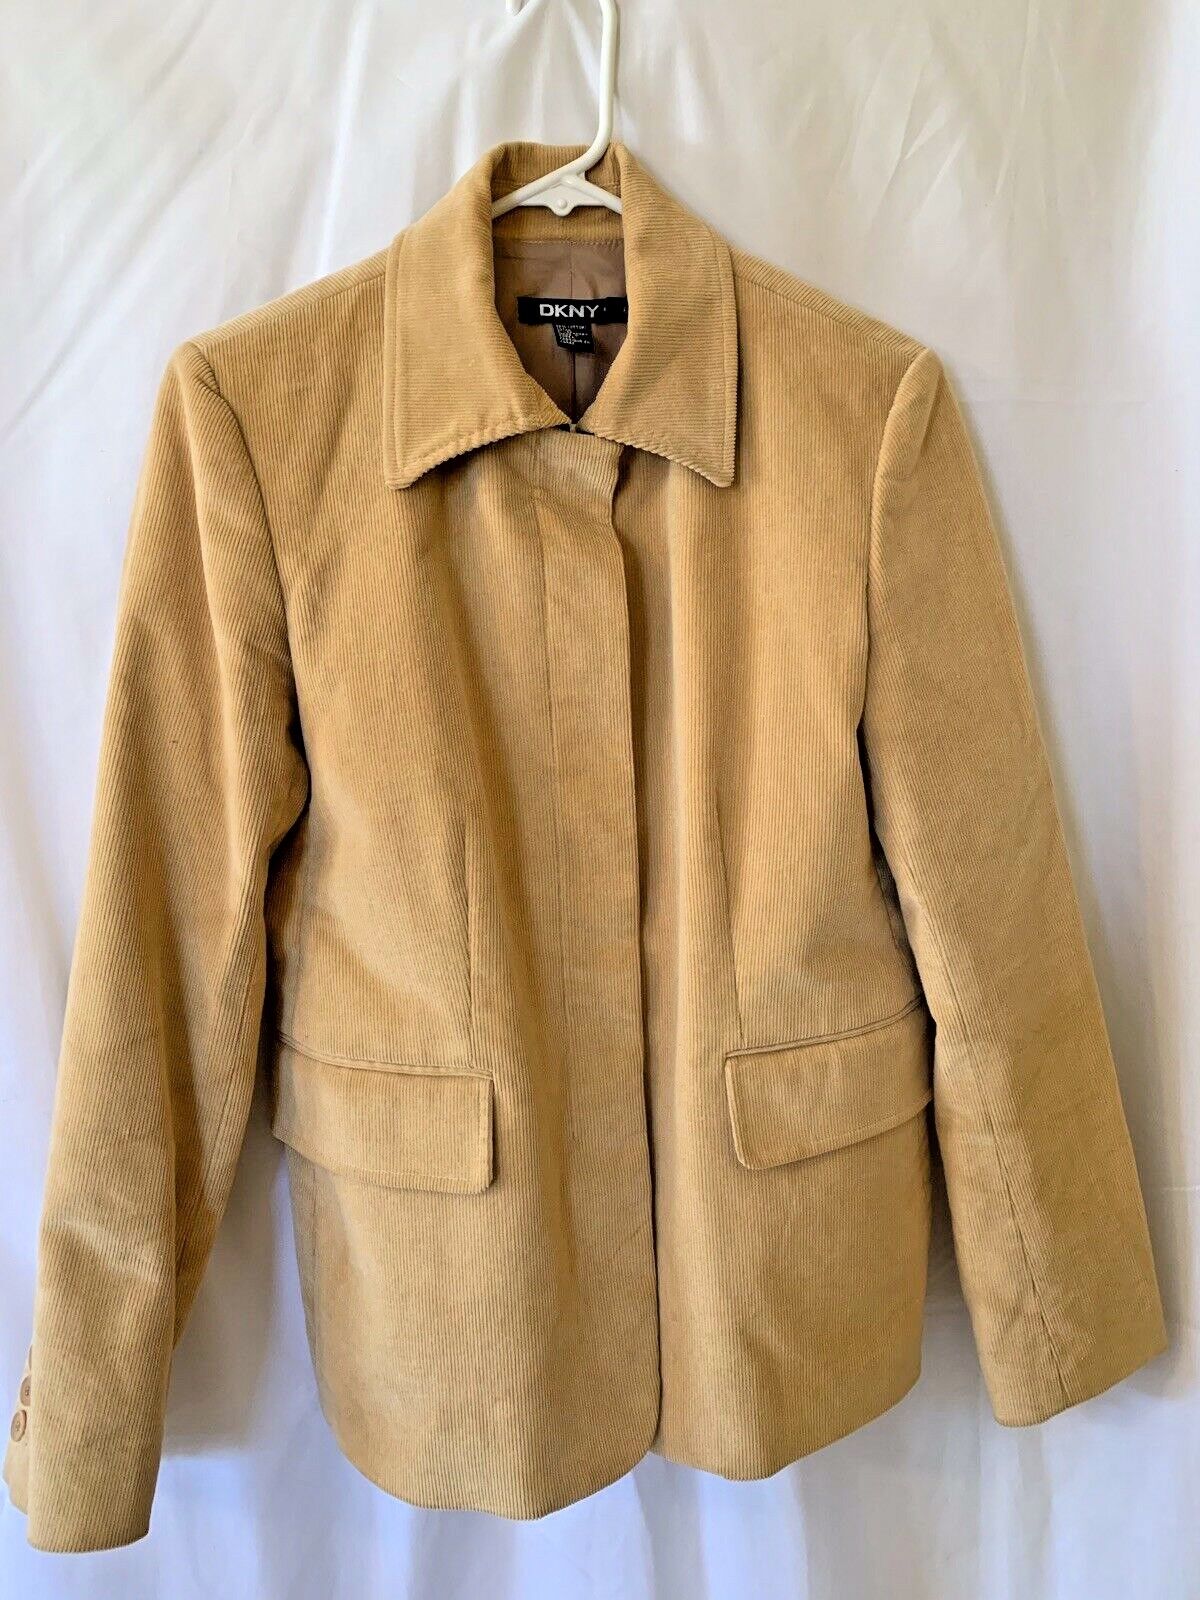 DKNY Ladies LINED Corduroy Jacket Mustard Yellow Size 6 Womans Cotton/Spandex